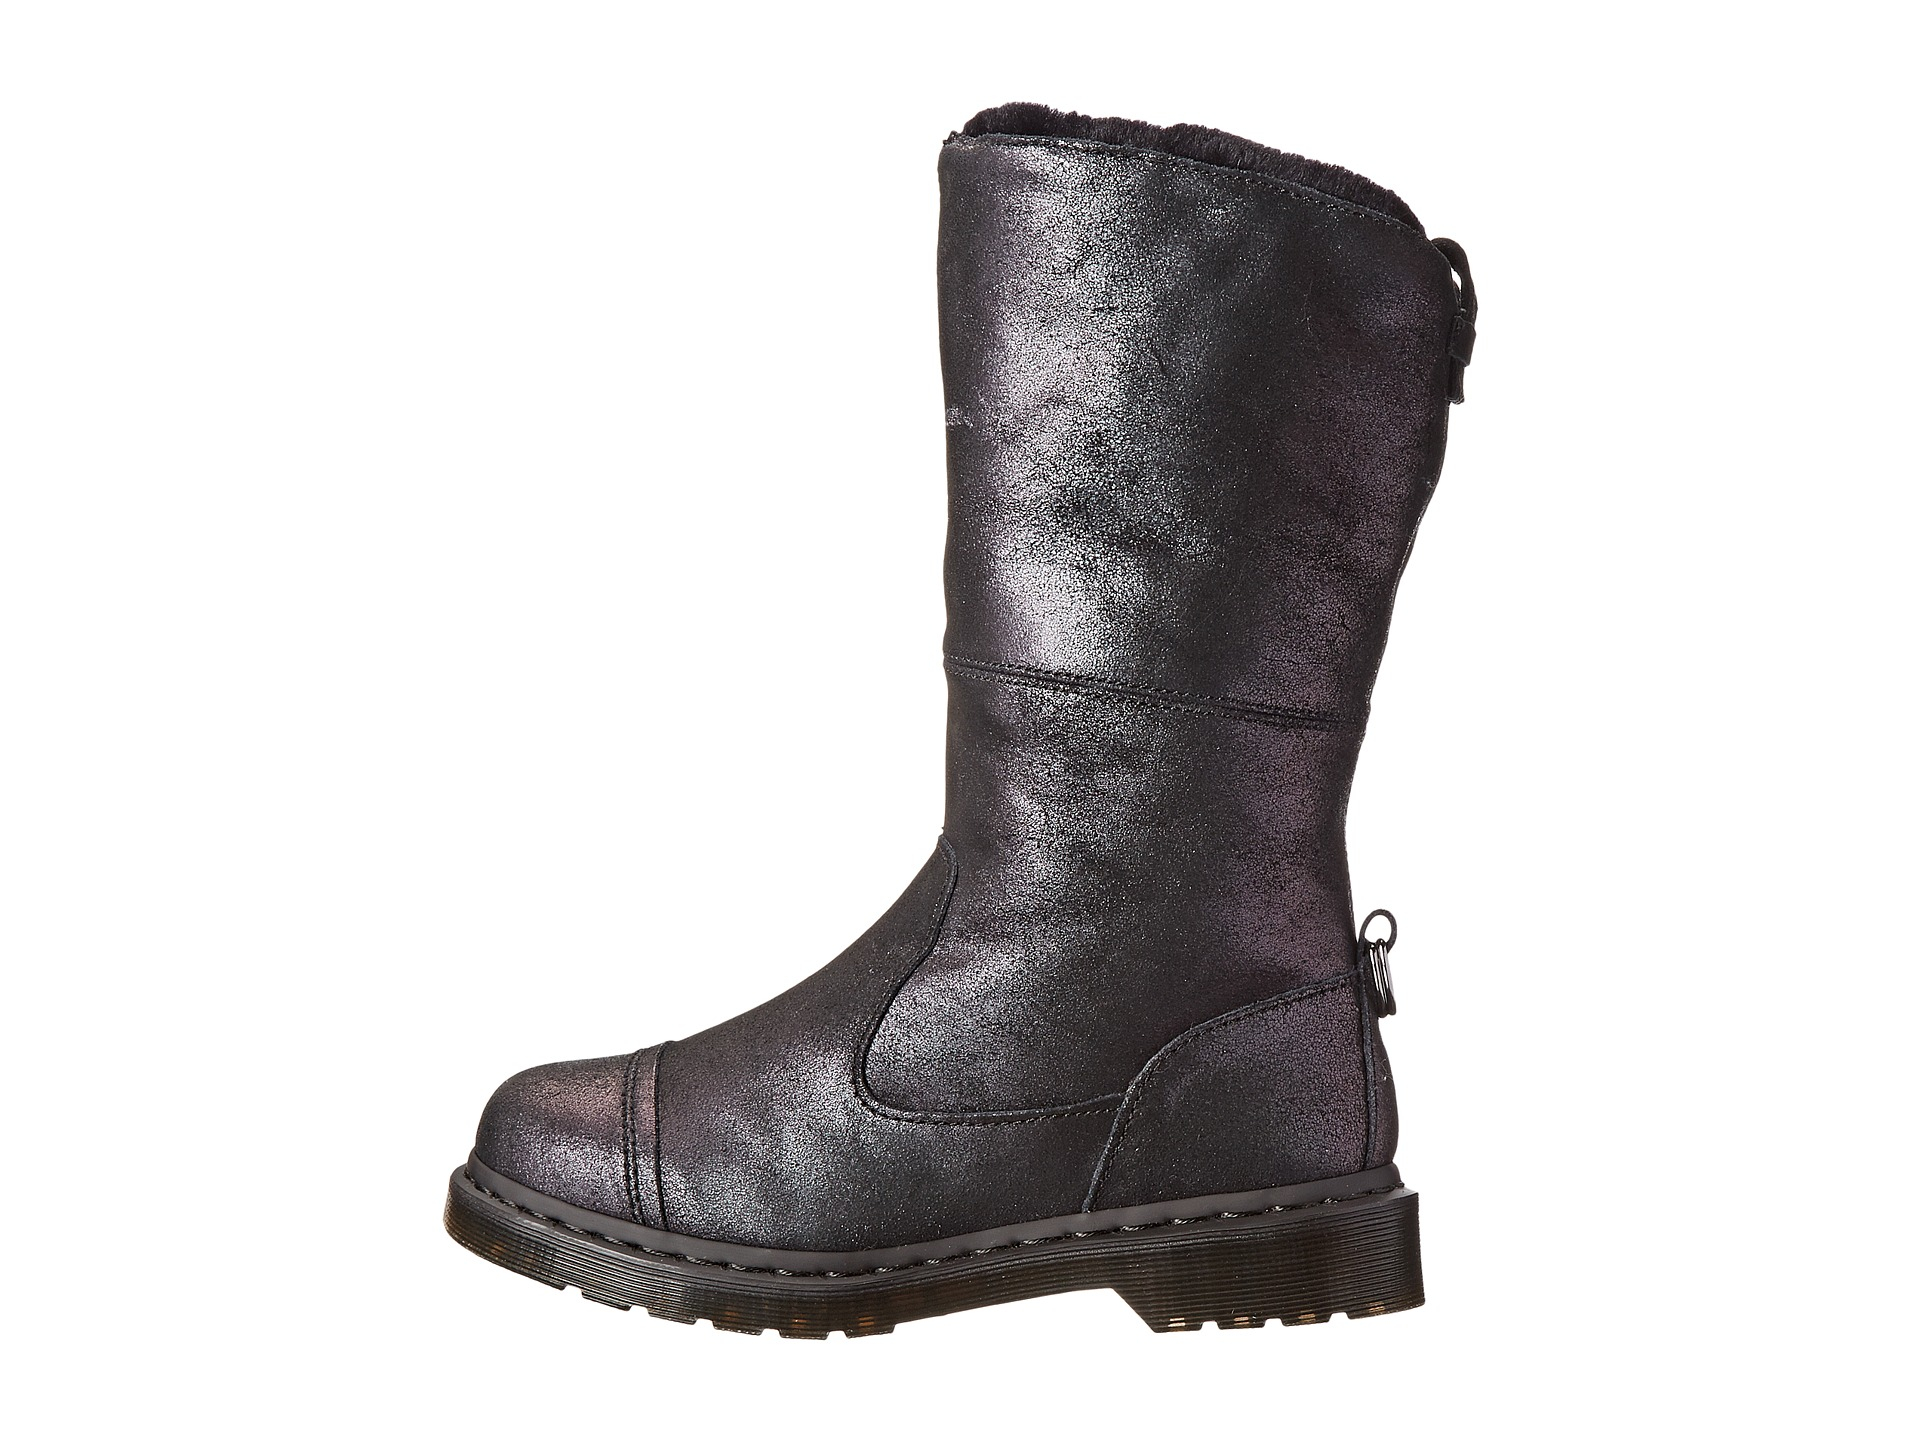 Dr. Martens Pasha Rigger Calf Boot in Black - Lyst